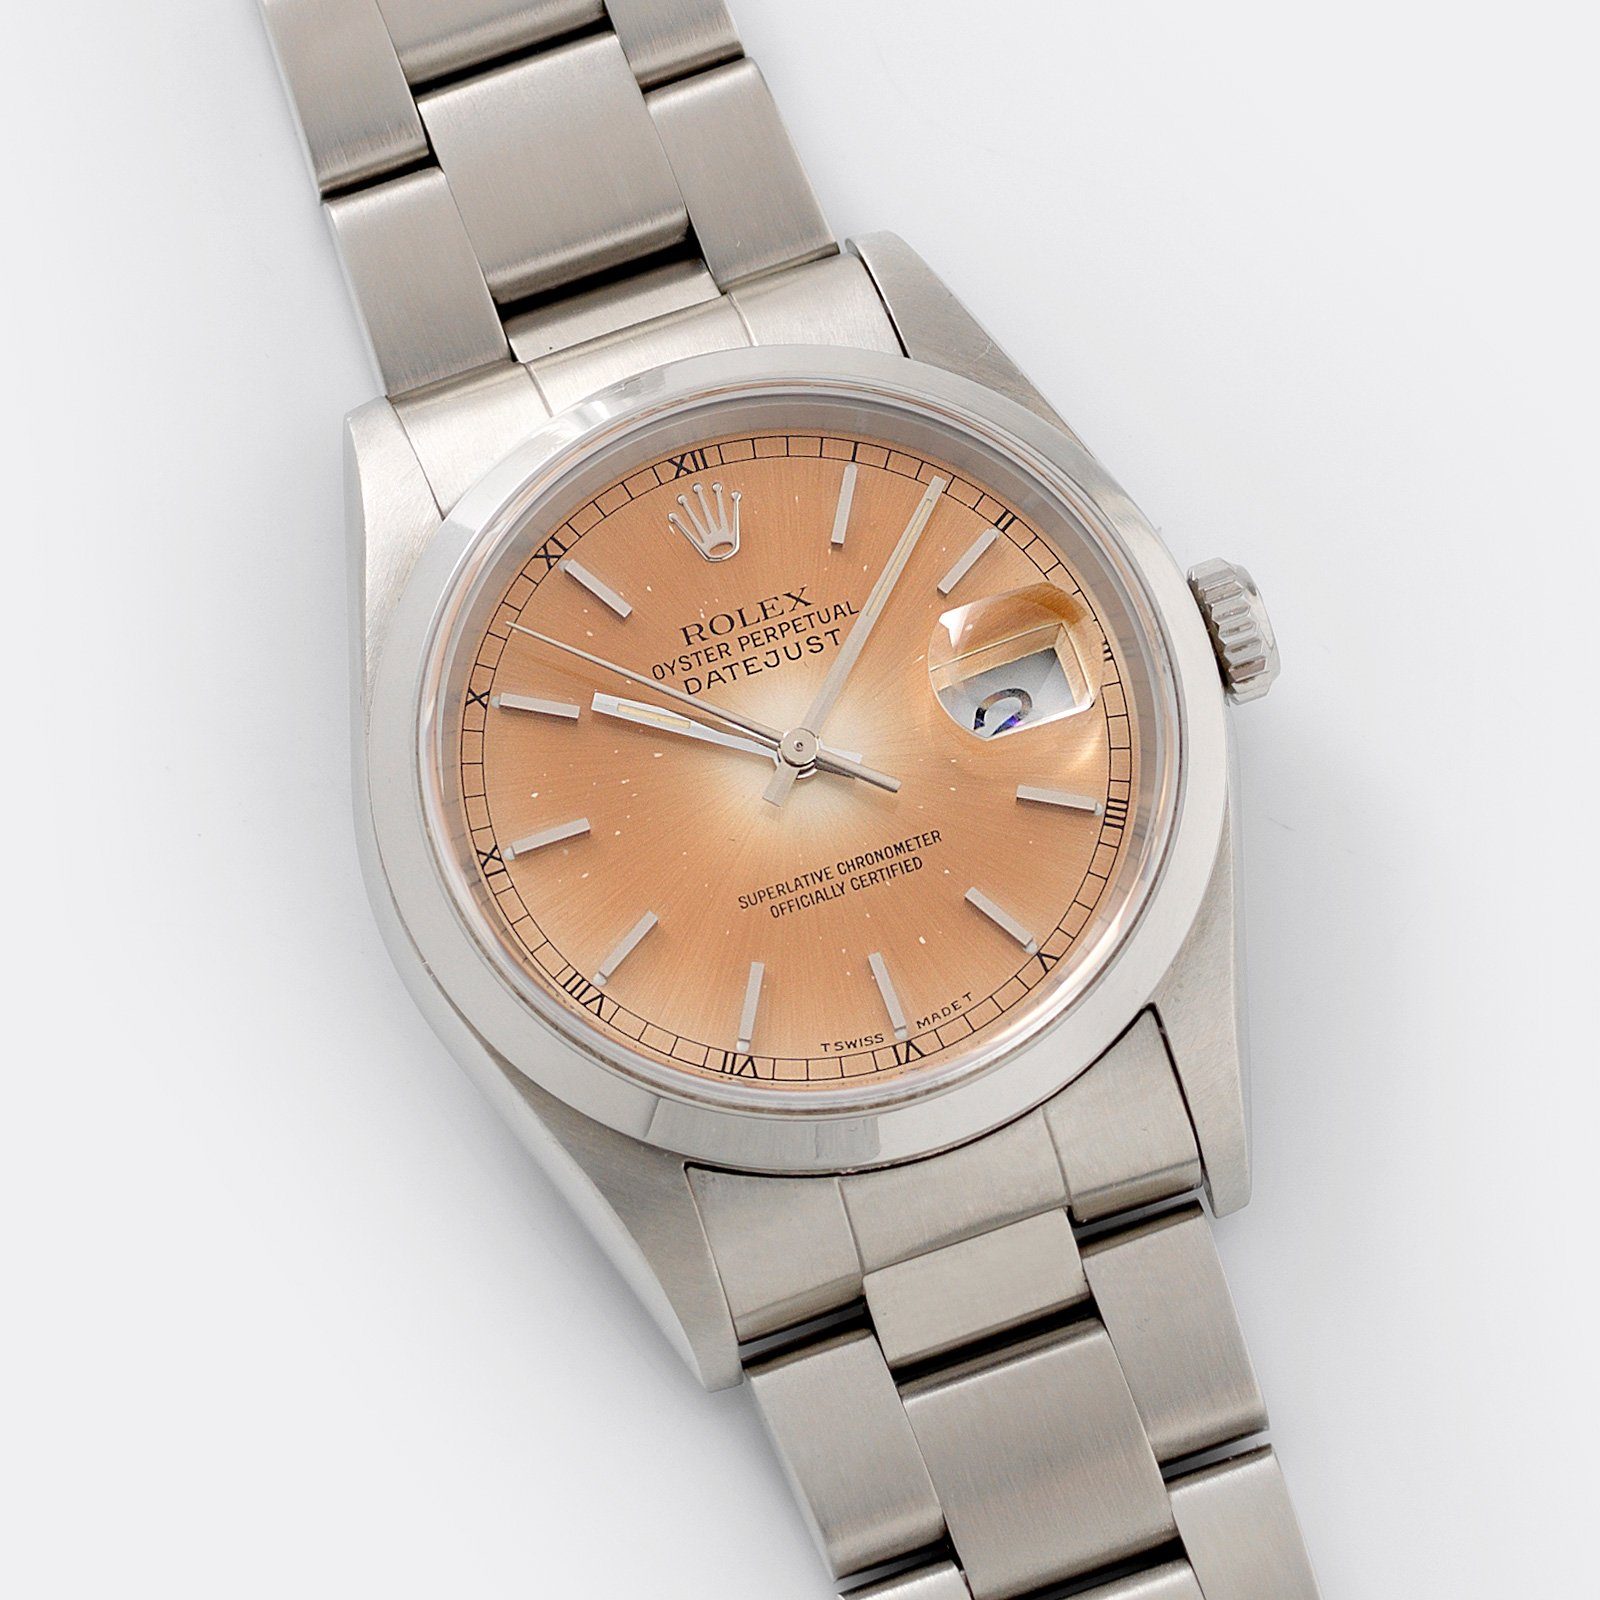 Rolex Datejust Salmon Tropical Patina Dial Reference 16200